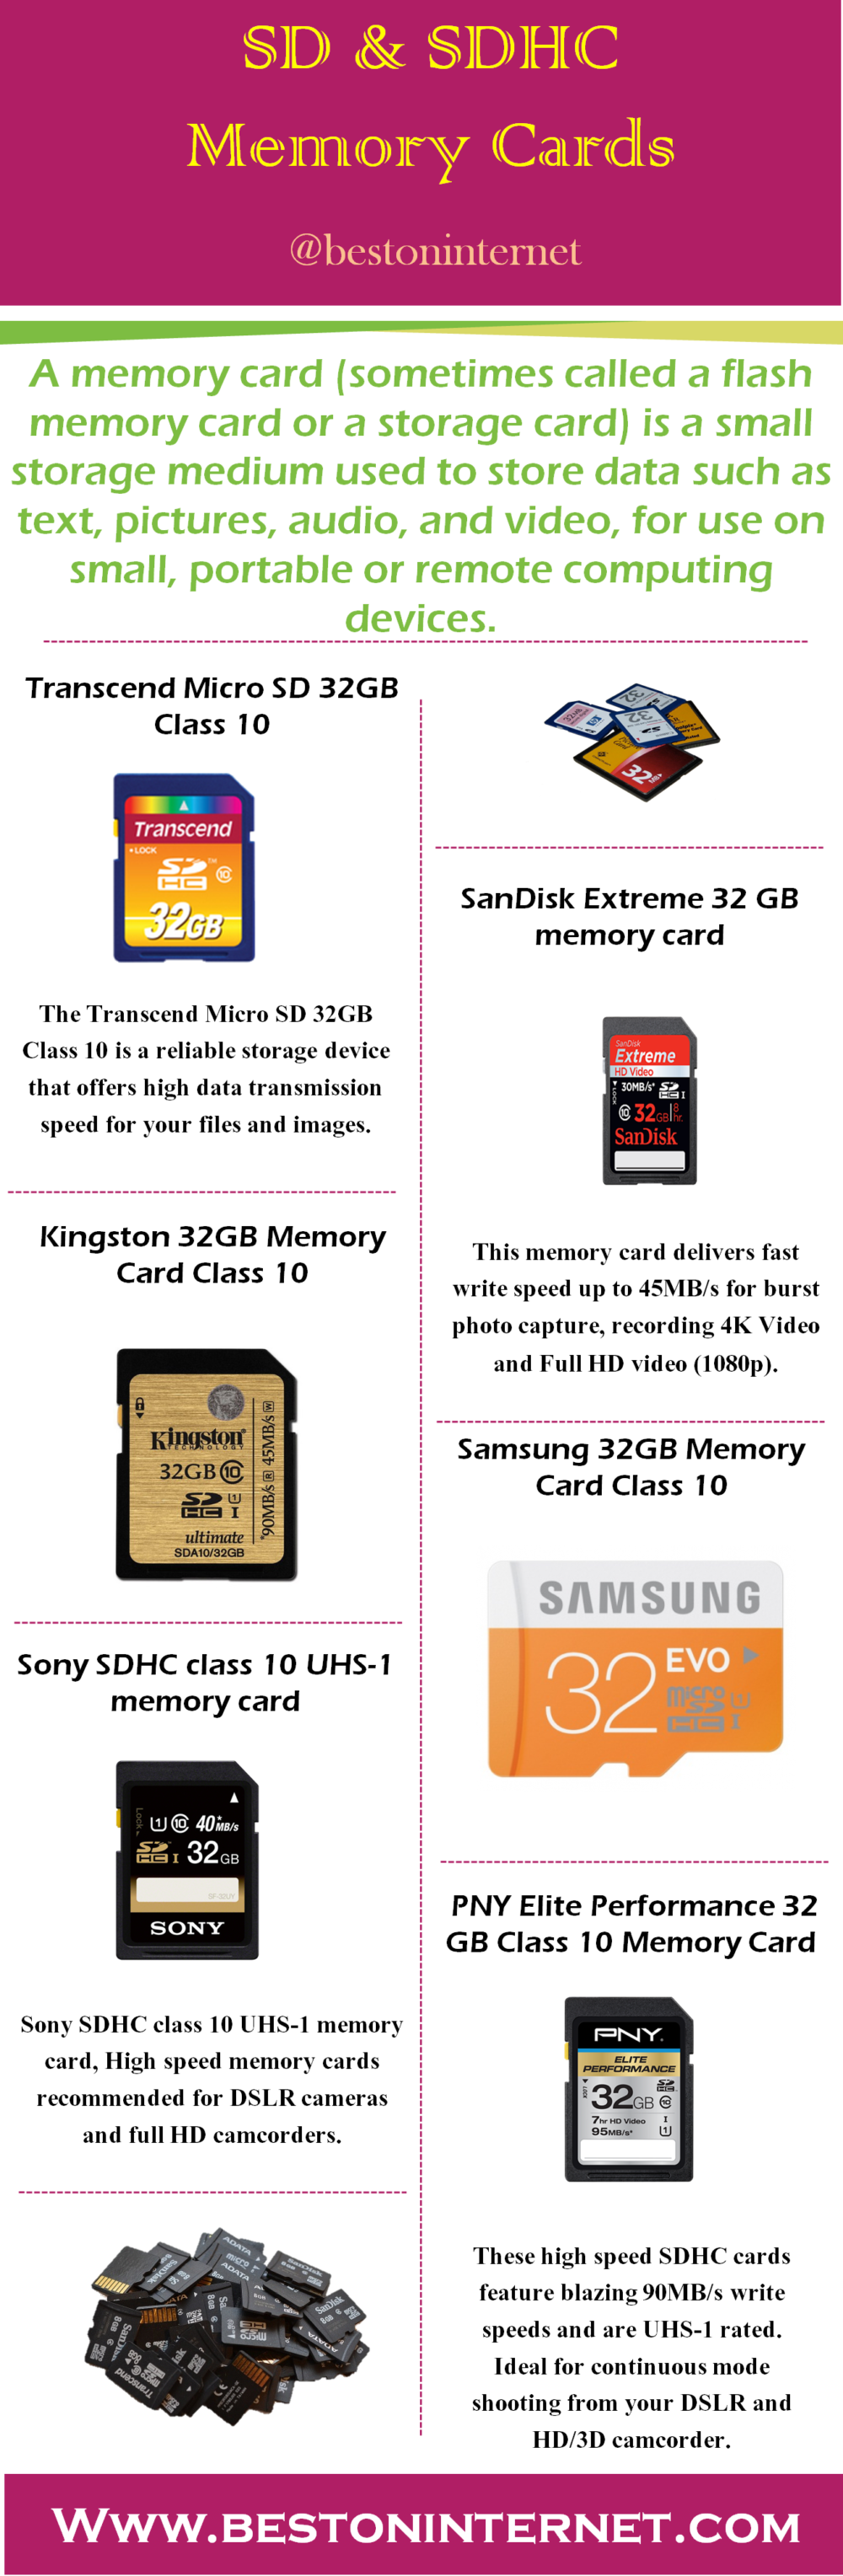 Best SD & SDHC Memory Cards of 2015